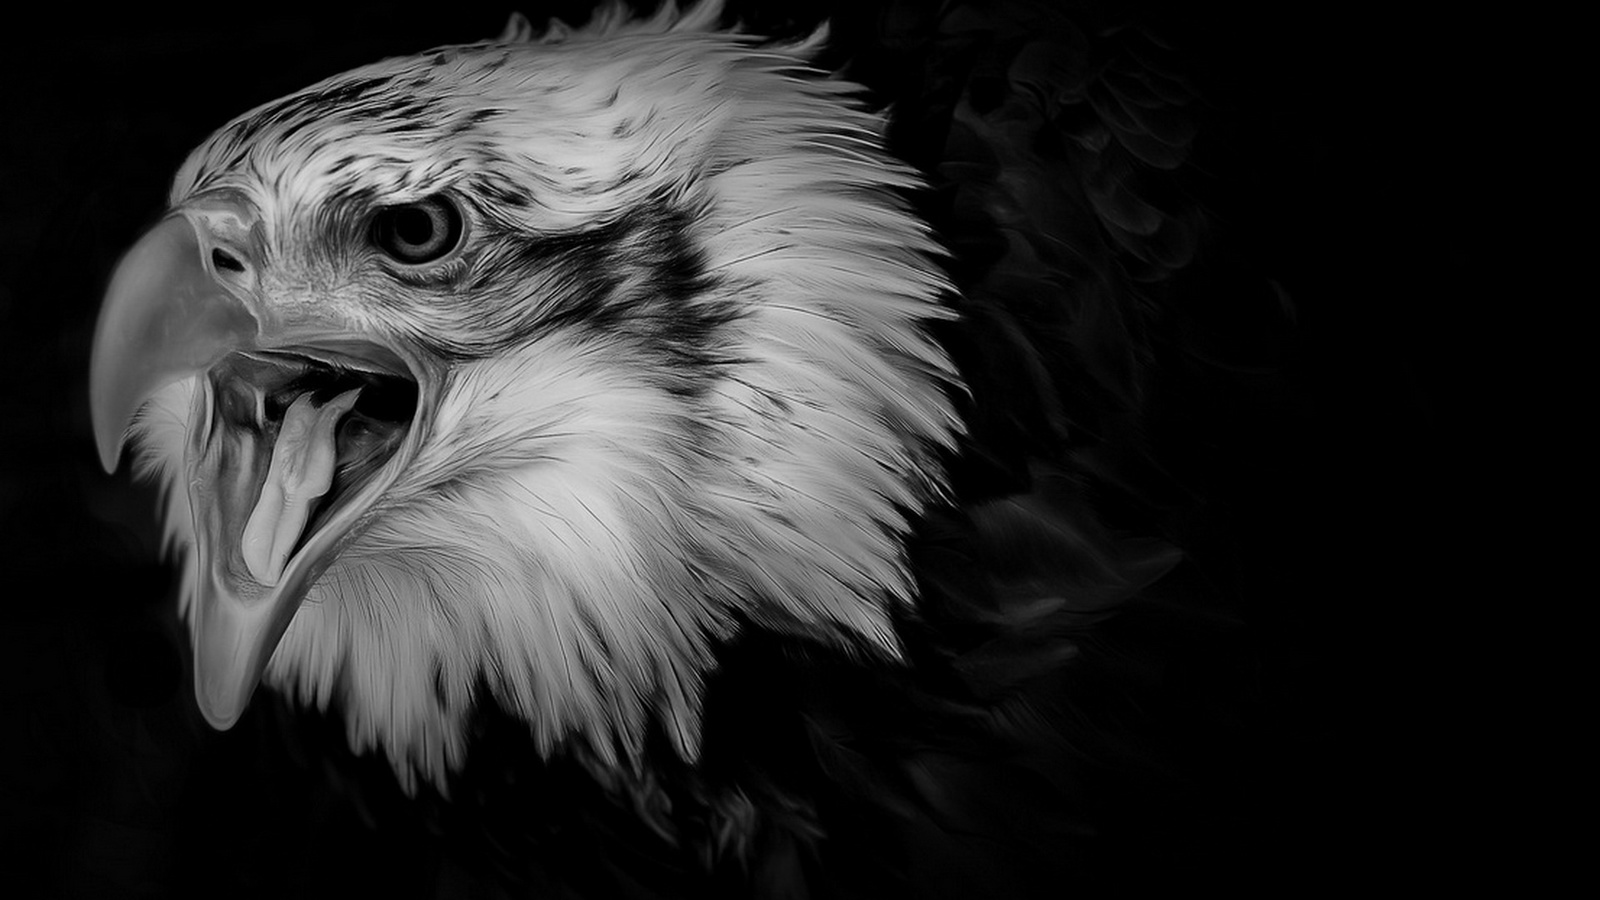 Free download 5548002 1600x900 black eagle wallpaper for computer Cool